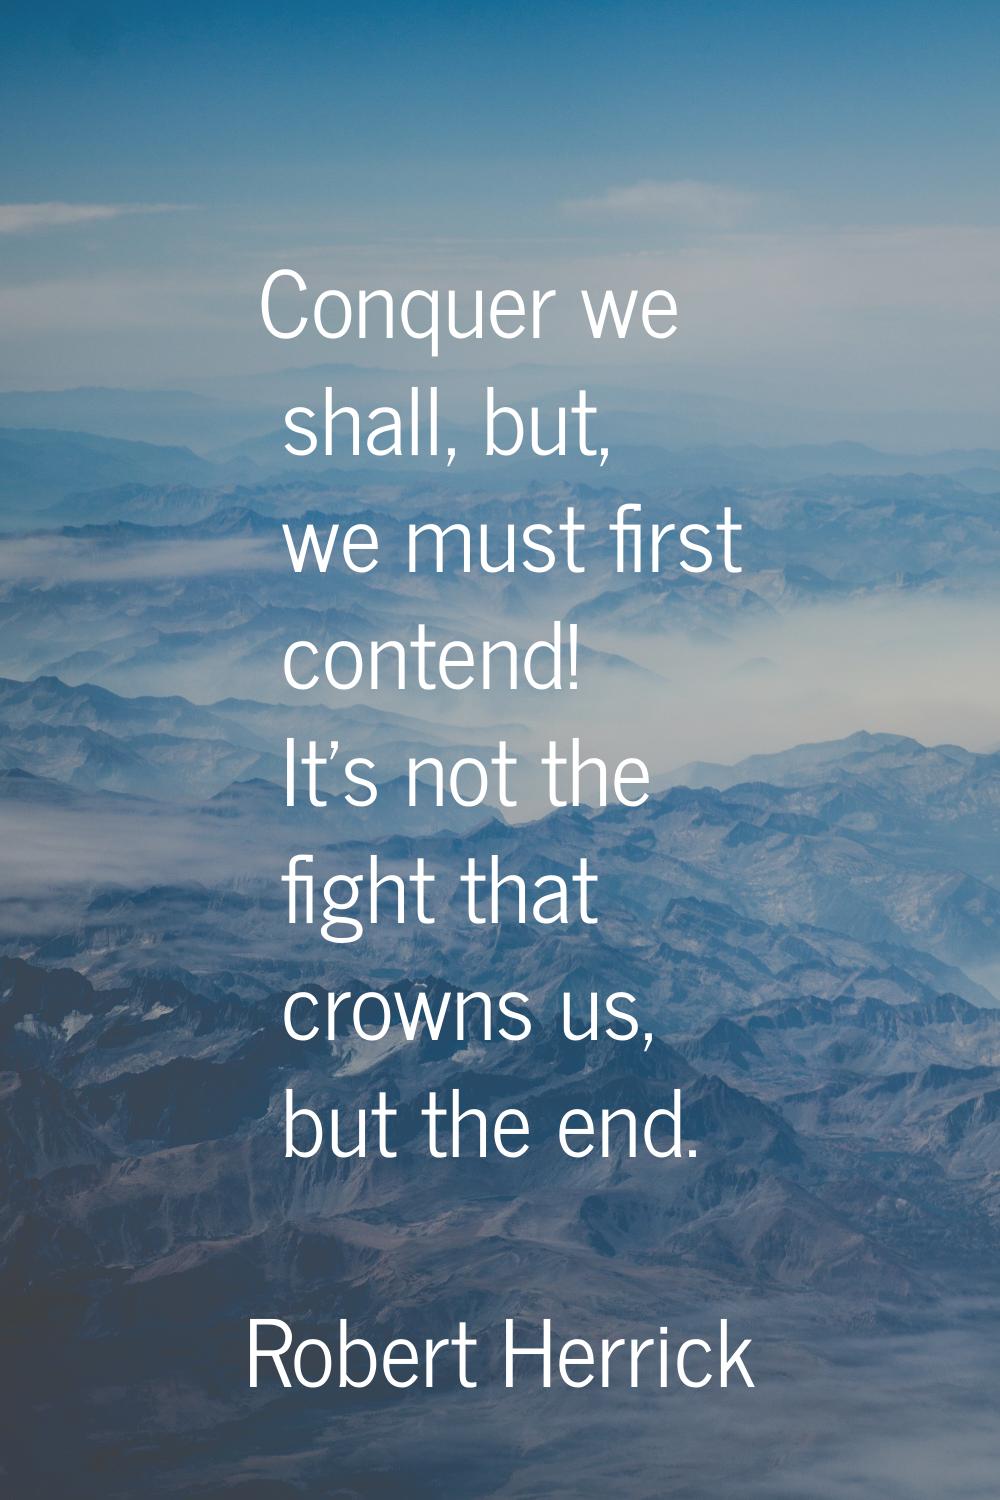 Conquer we shall, but, we must first contend! It's not the fight that crowns us, but the end.